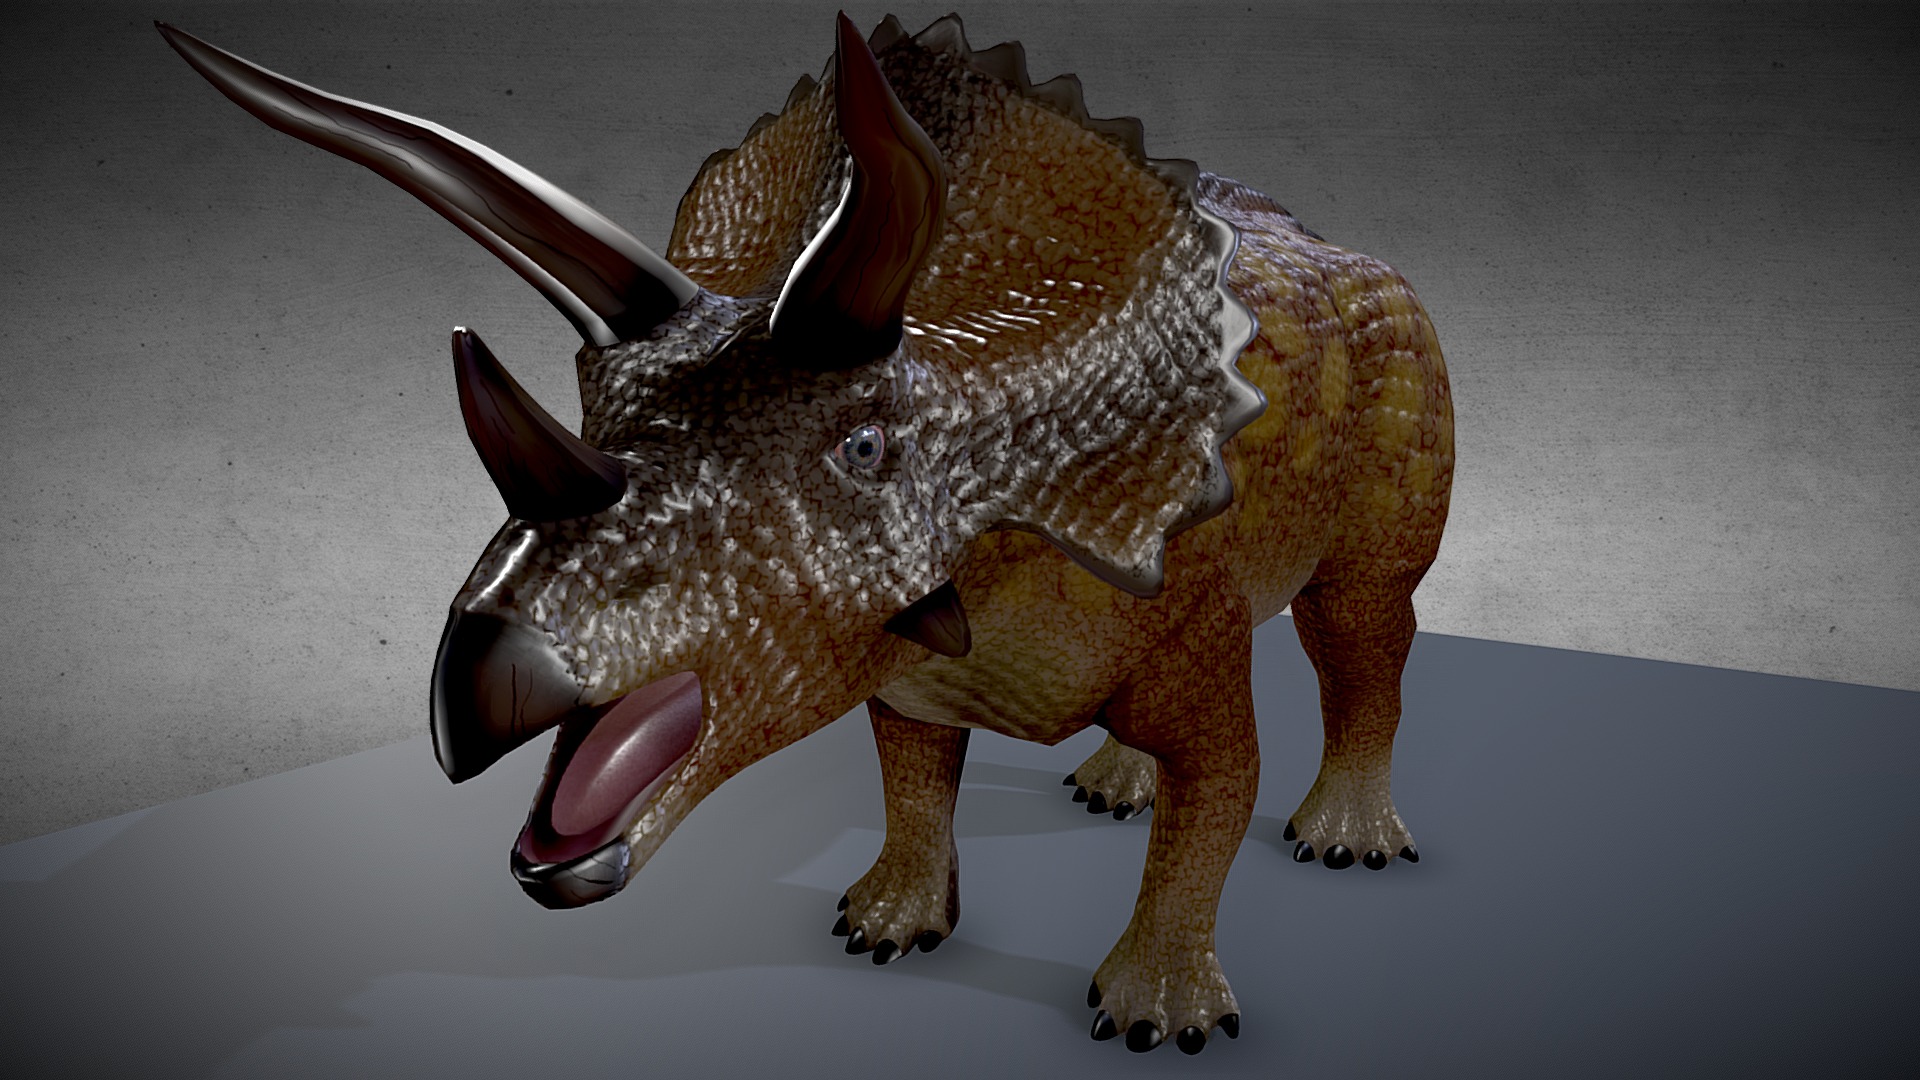 3D model Rigged Trike - This is a 3D model of the Rigged Trike. The 3D model is about a toy dinosaur with horns.